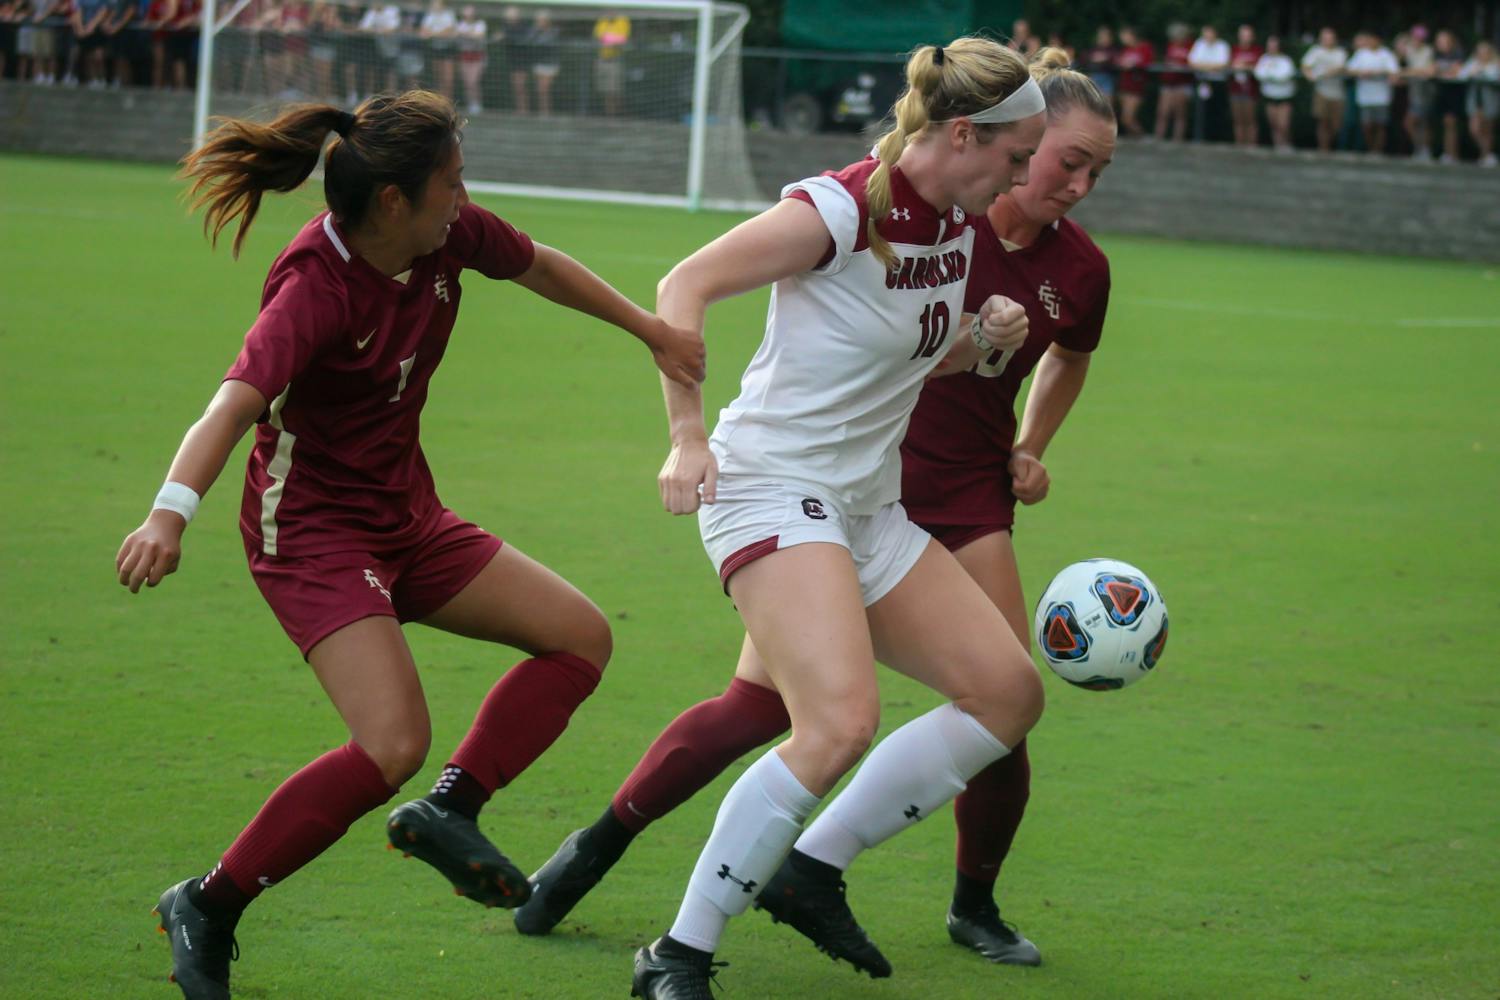 Junior forward Catherine Berry fights off defenders in pursuit of a goal during a women's soccer game Thursday afternoon, August 18, 2022. USC tied against FSU 0-0.